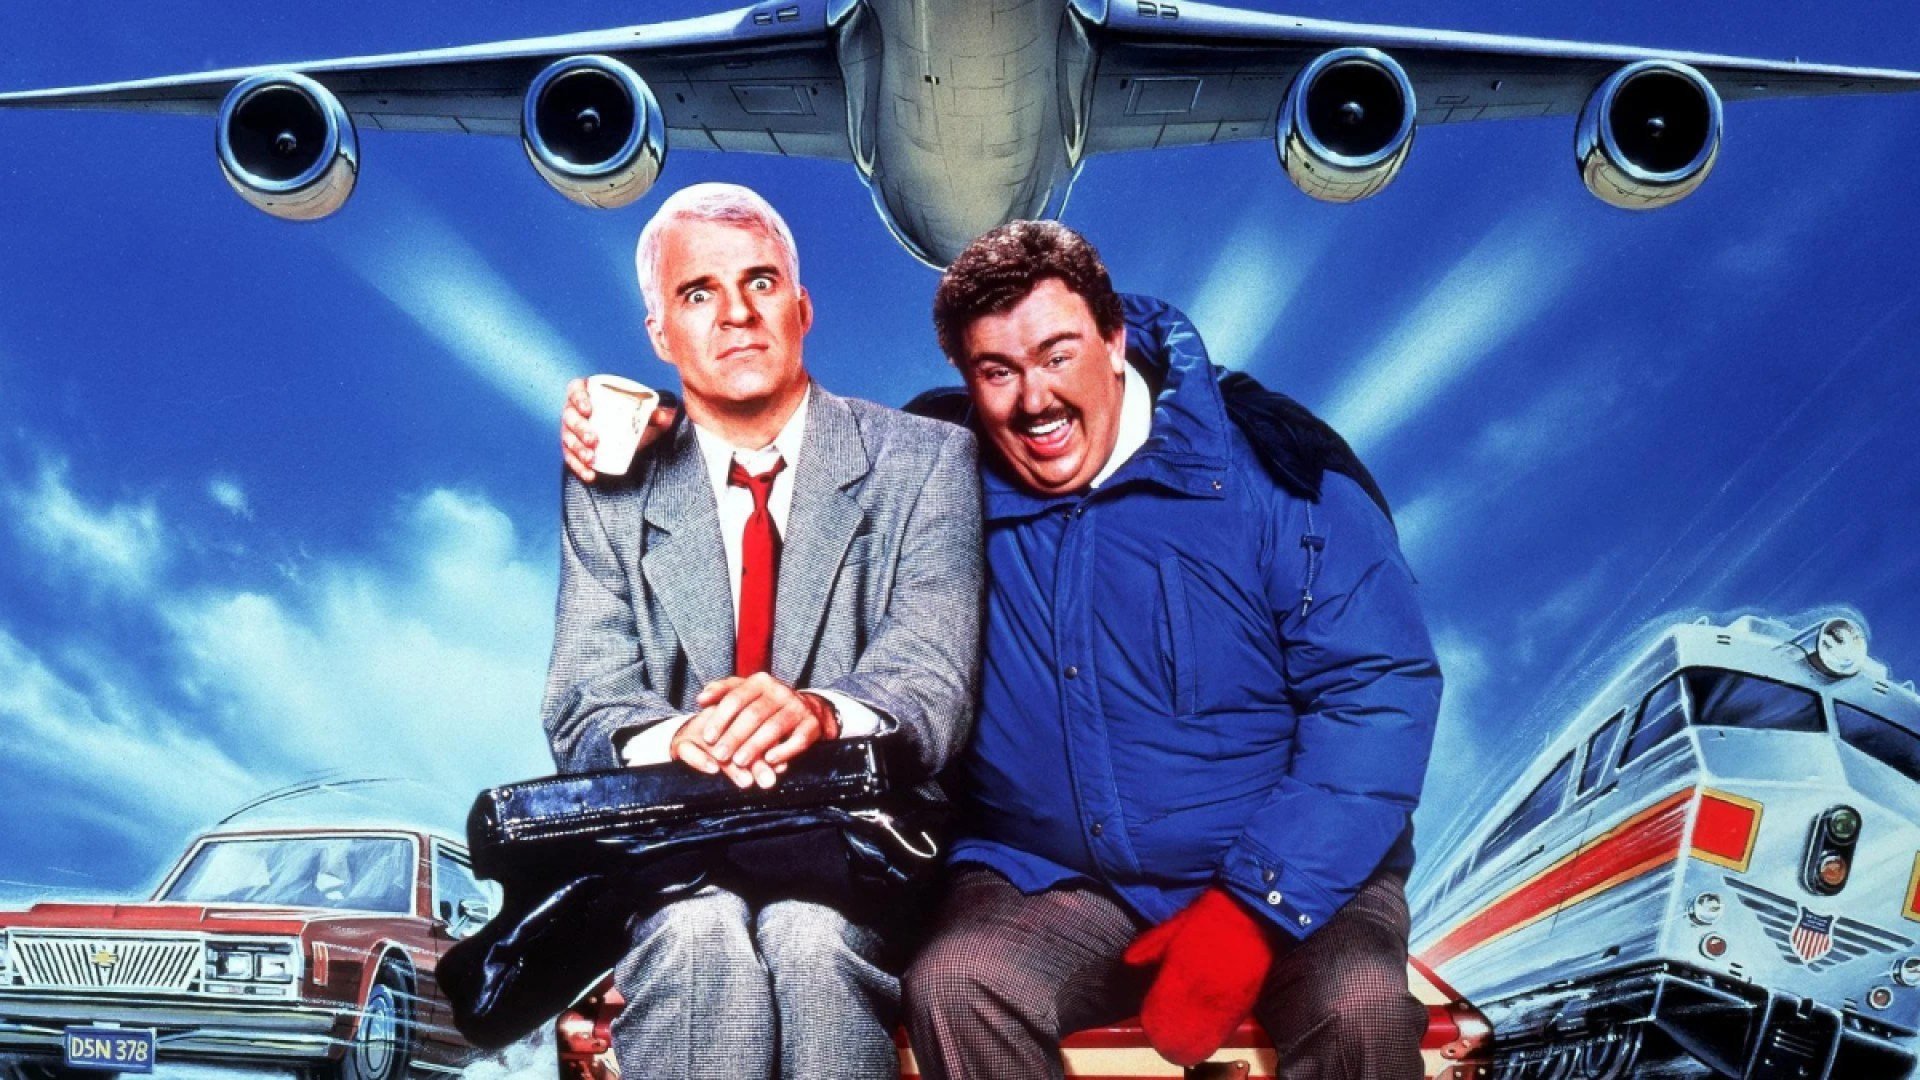 Steve Martin & John Candy in Planes, Trains and Automobiles